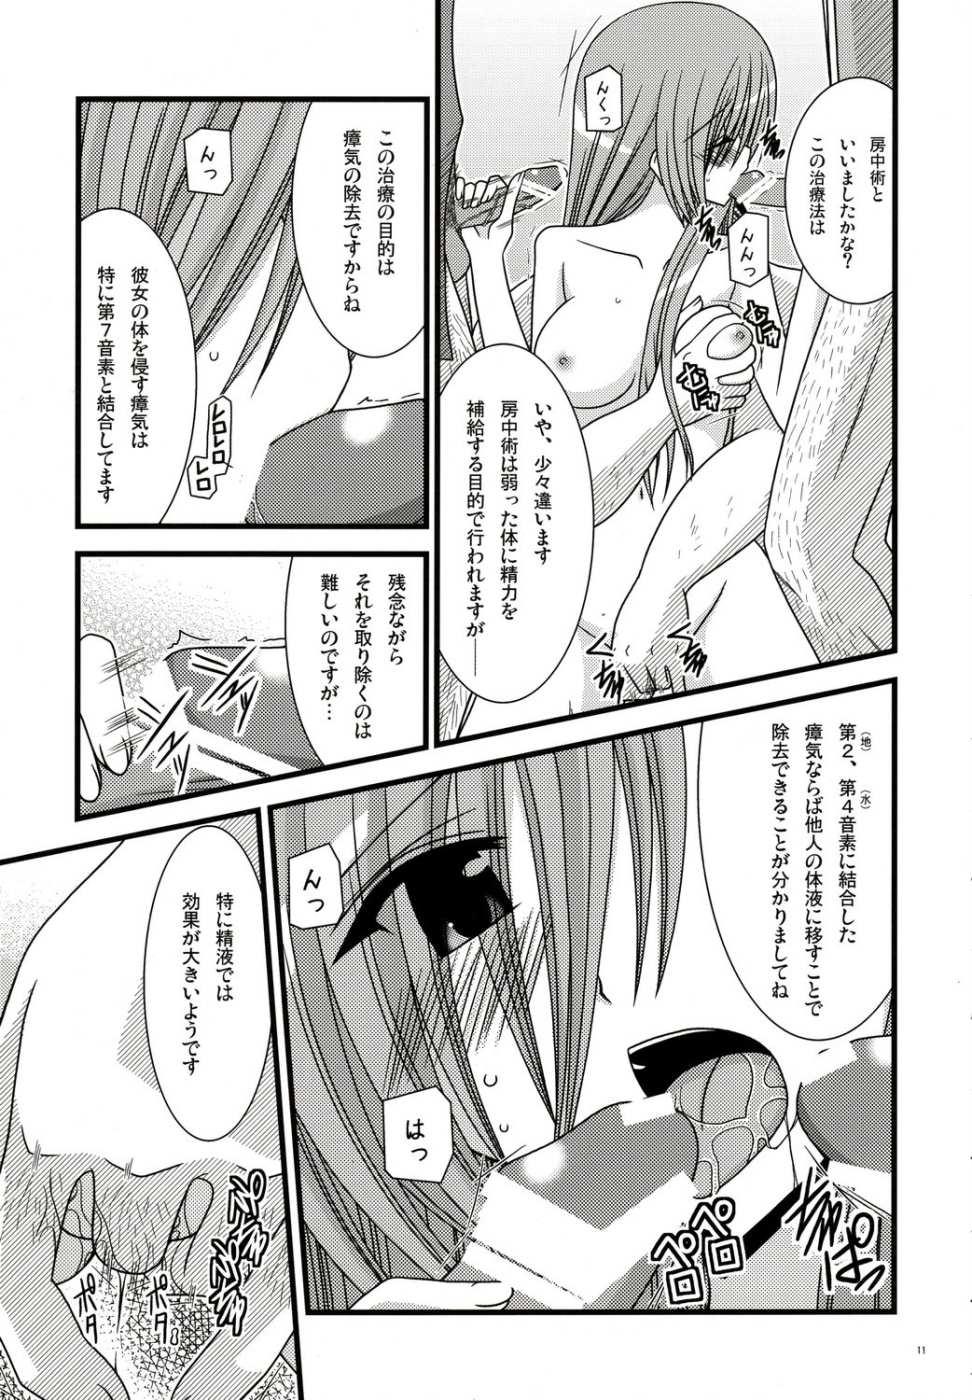 Couple Porn Kanjuku Melon - Tales of the abyss Oral Porn - Page 10